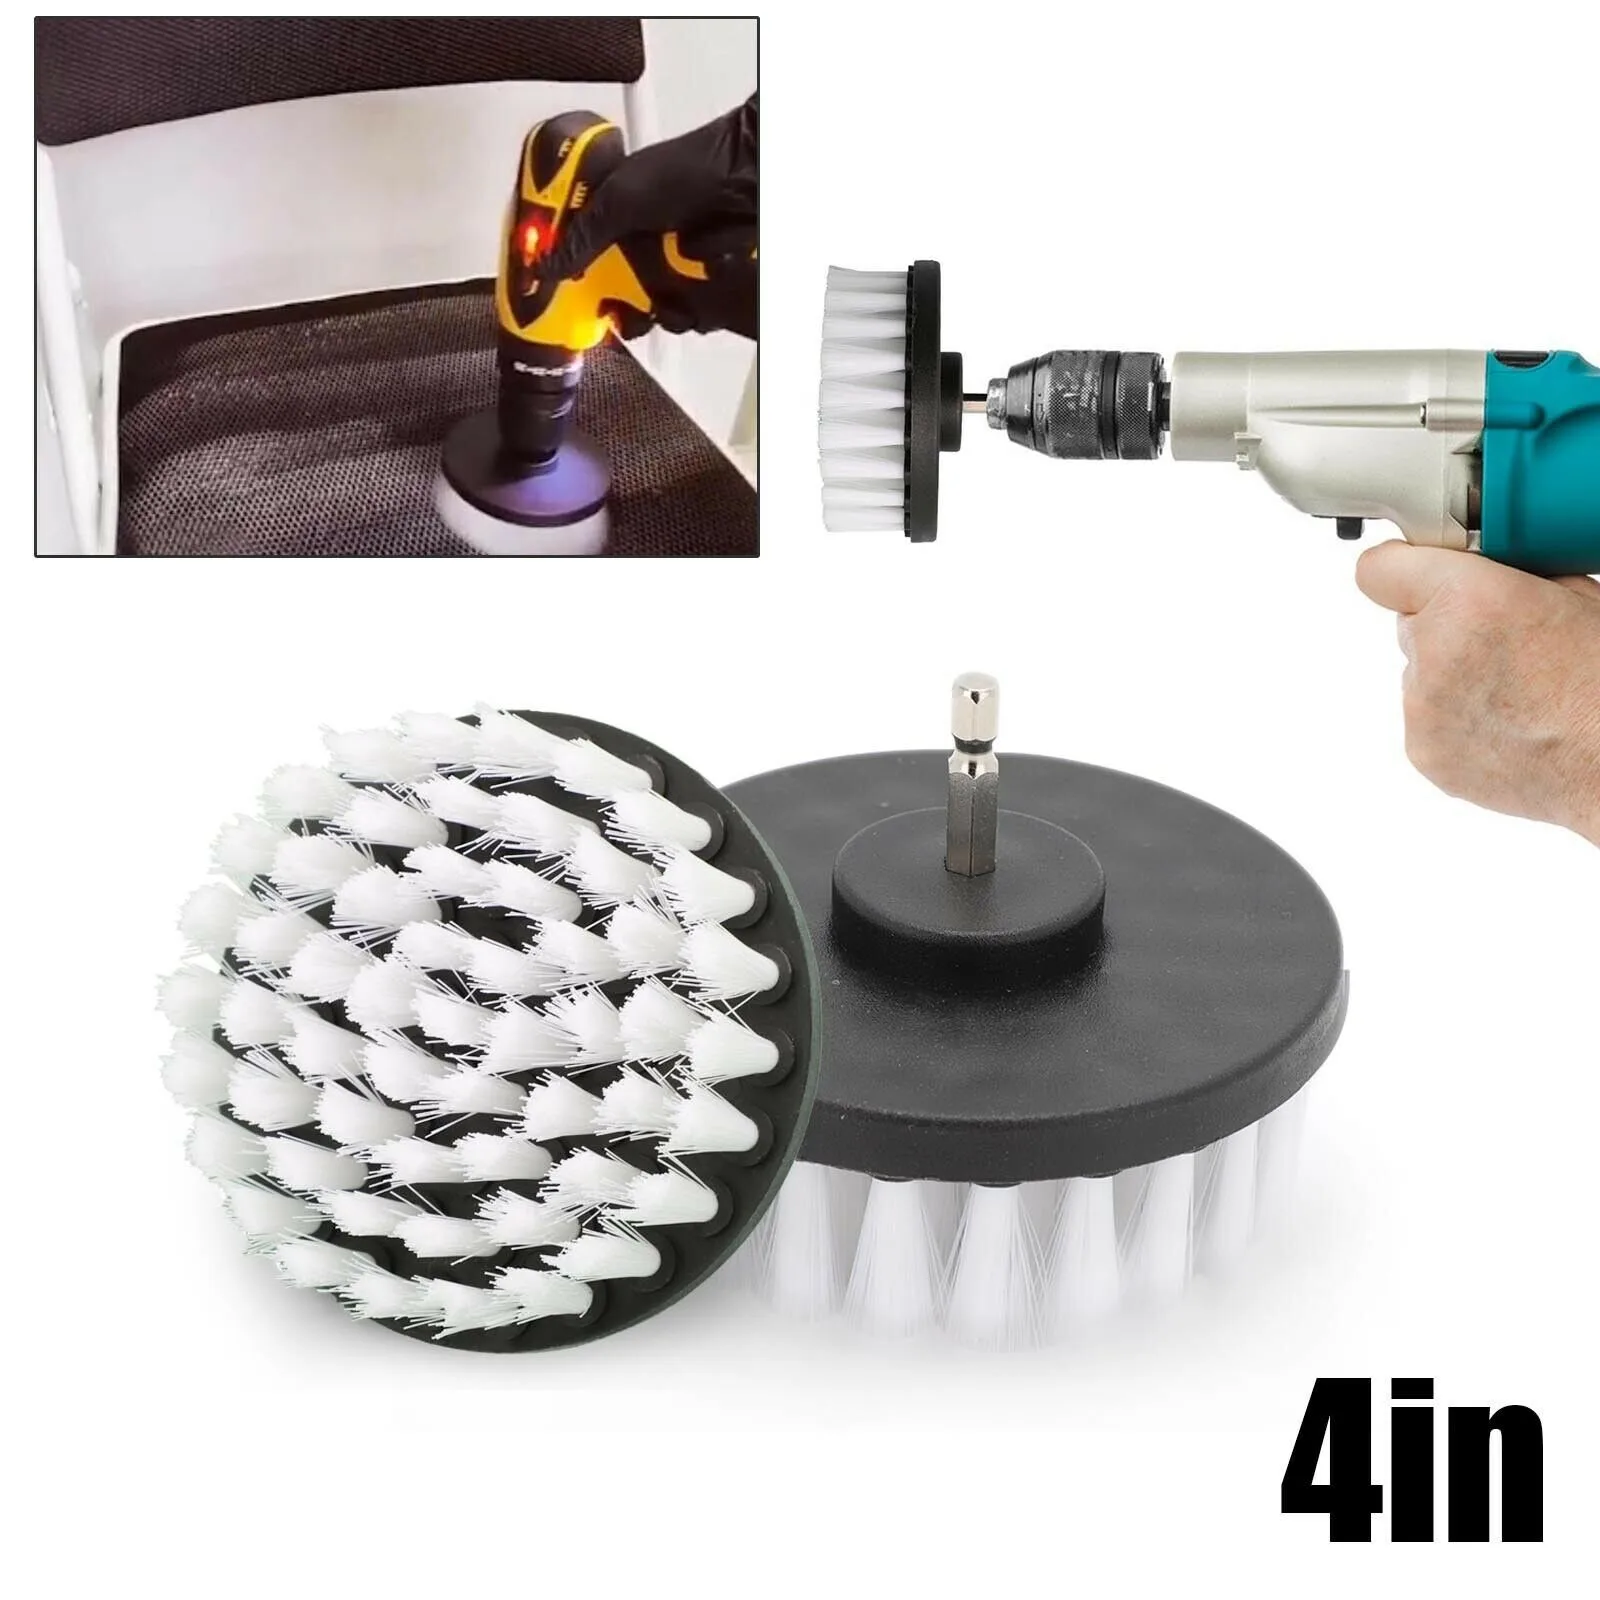 

4 Inch Electric Drill Brush Soft Drill Brush Attachment Auto Tires Cleaning Tools For Cleaning Carpet & Leather And Upholstery